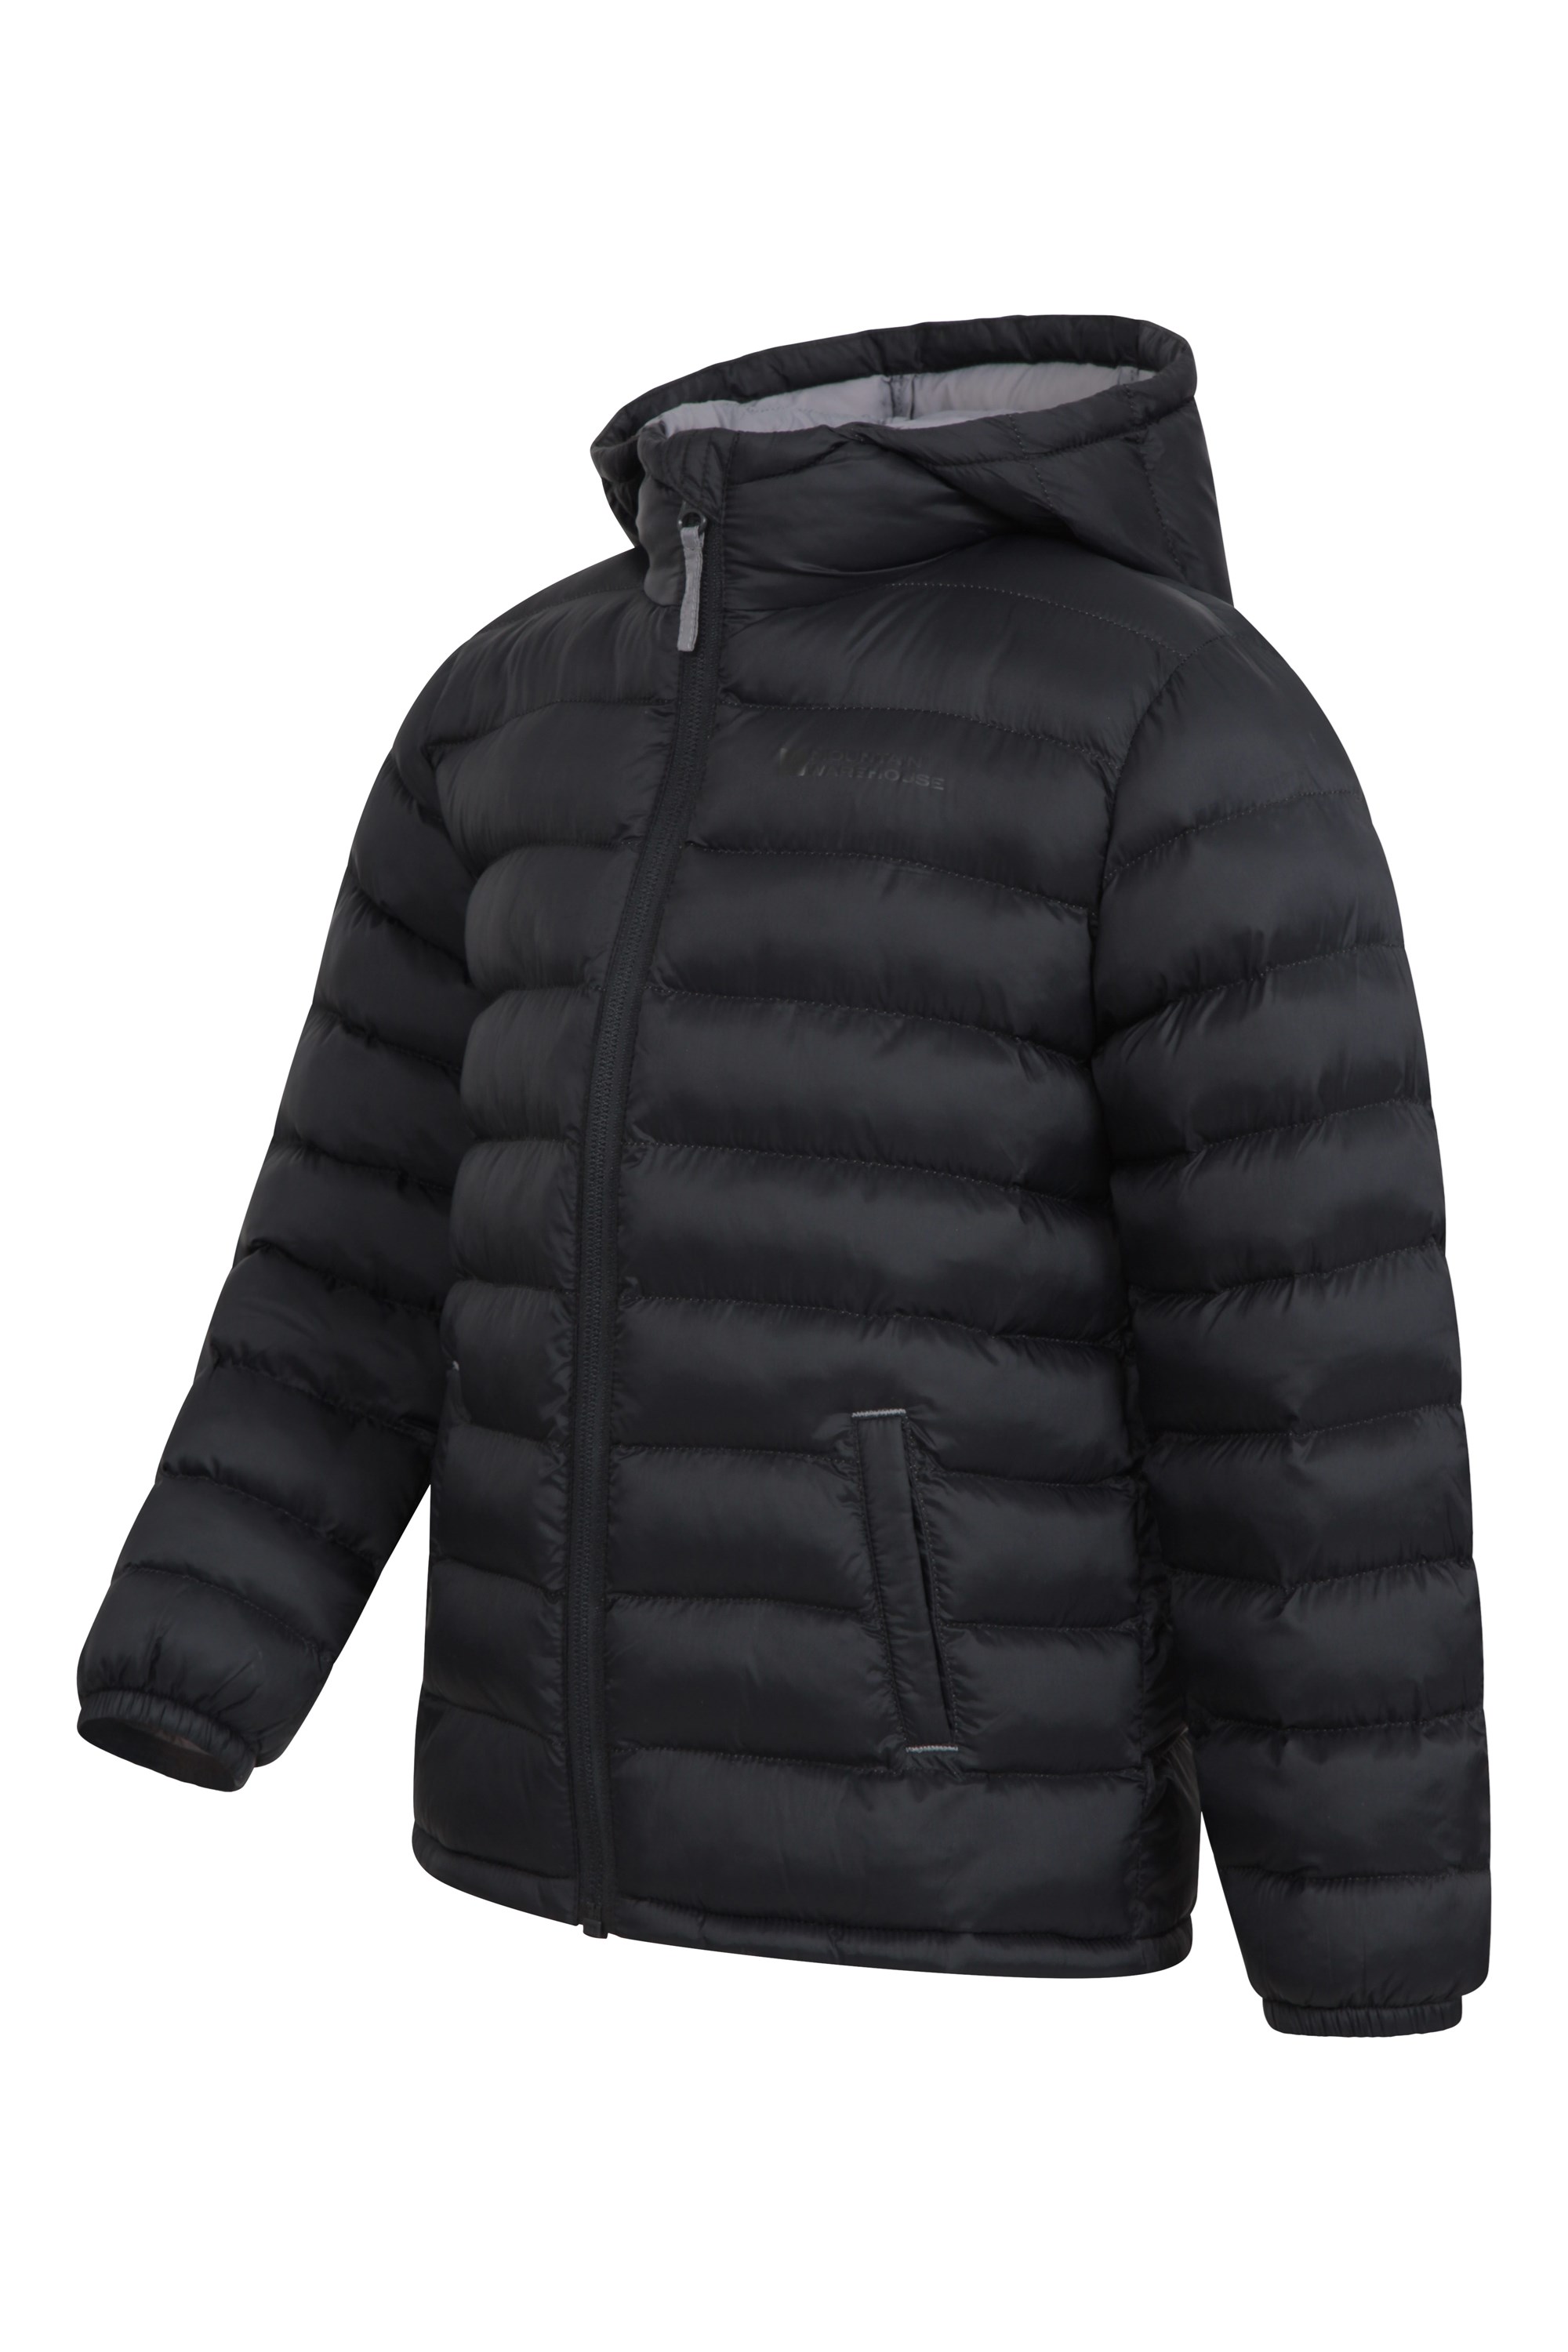 Galaxy Kids Water-resistant Long Insulated Jacket